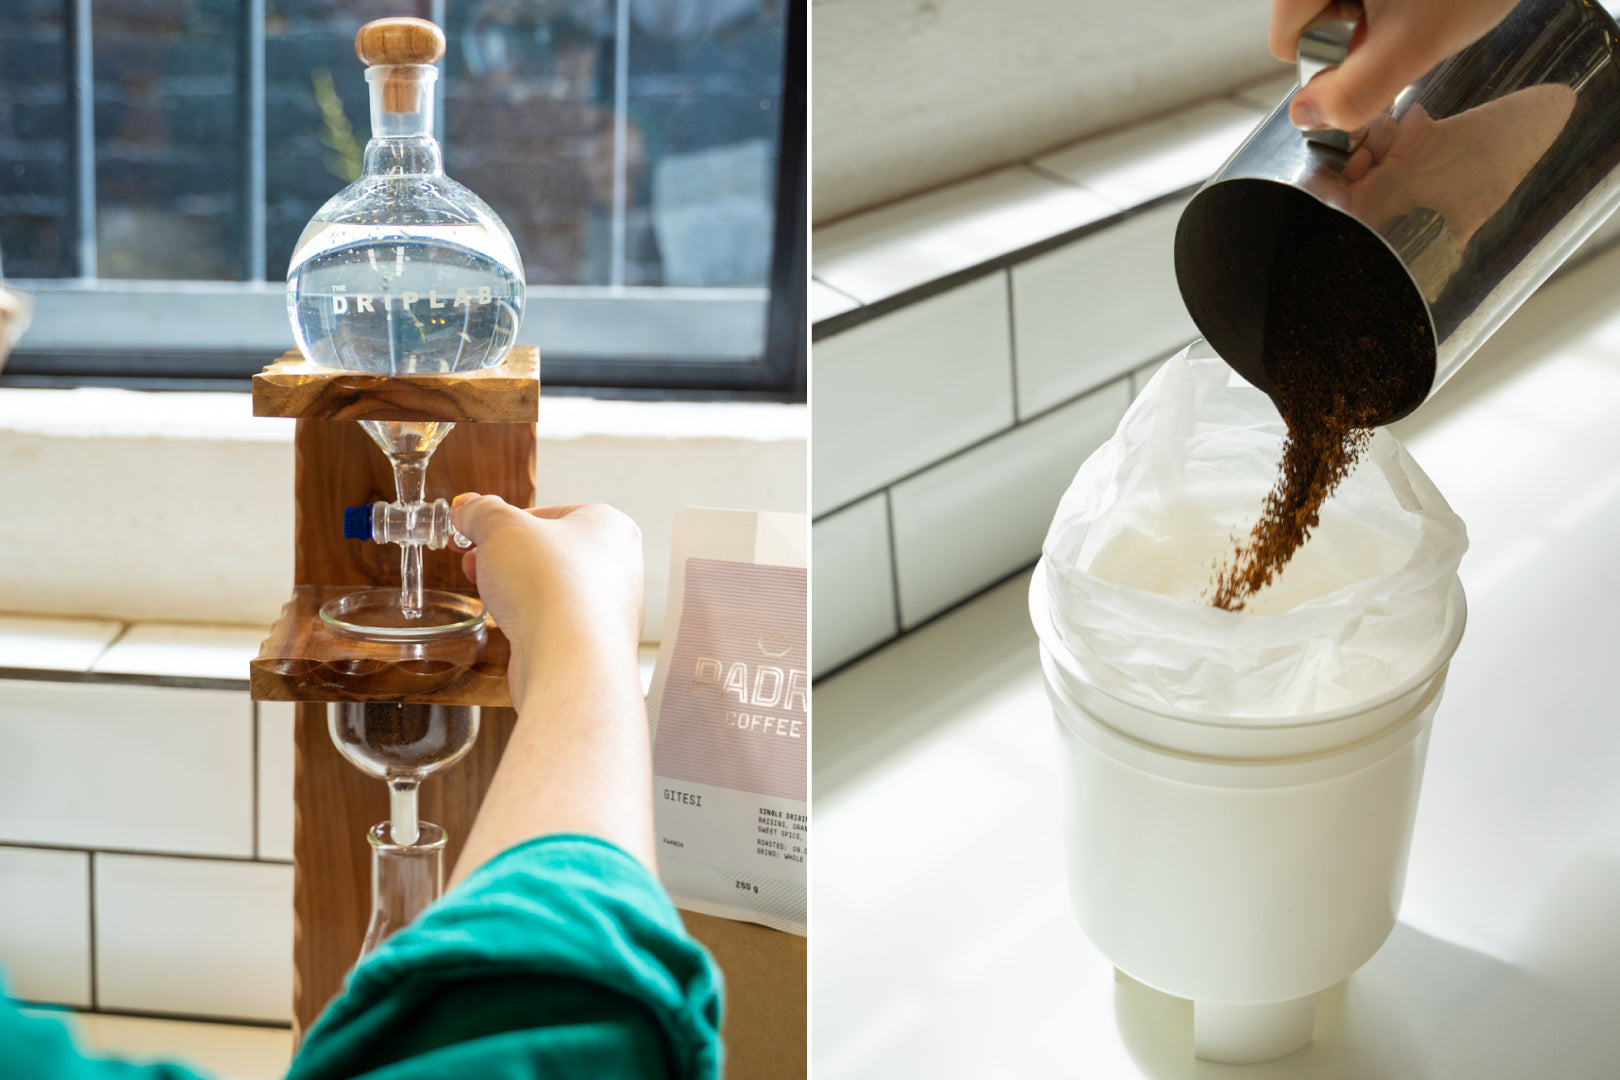 Cold Brew or Cold Drip: what’s the difference?